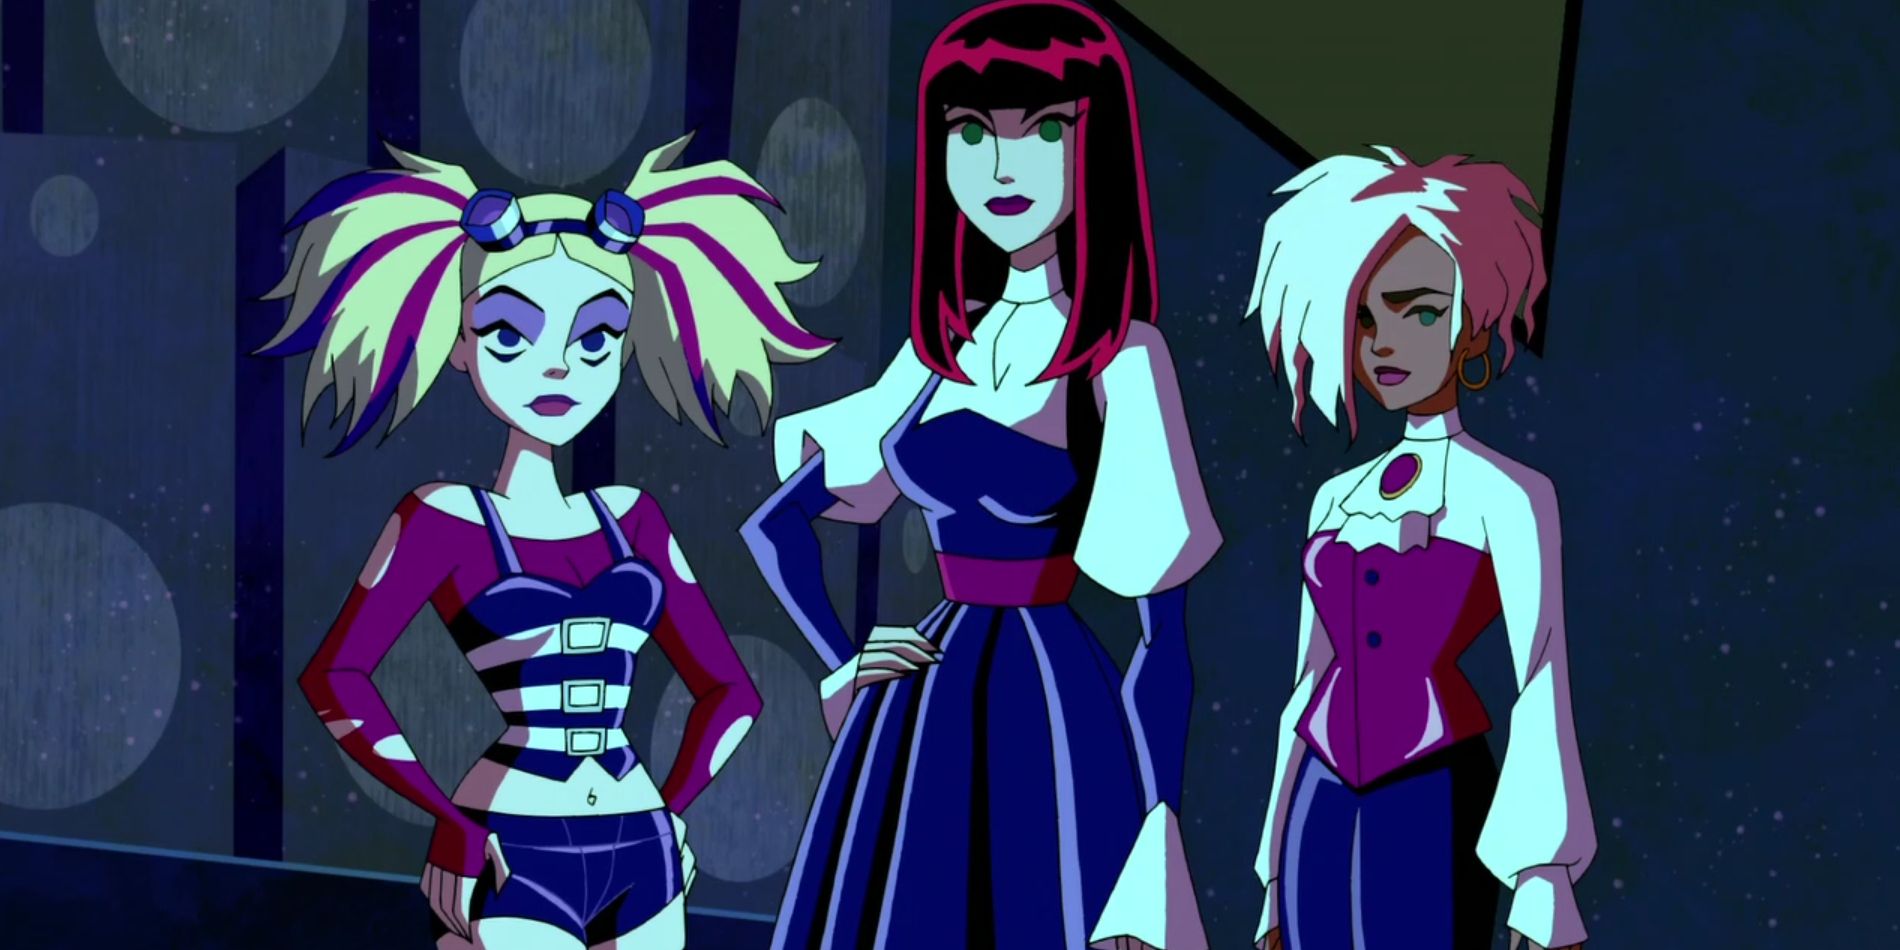 An image of the Hex Girls from the series, Mystery Incorporated